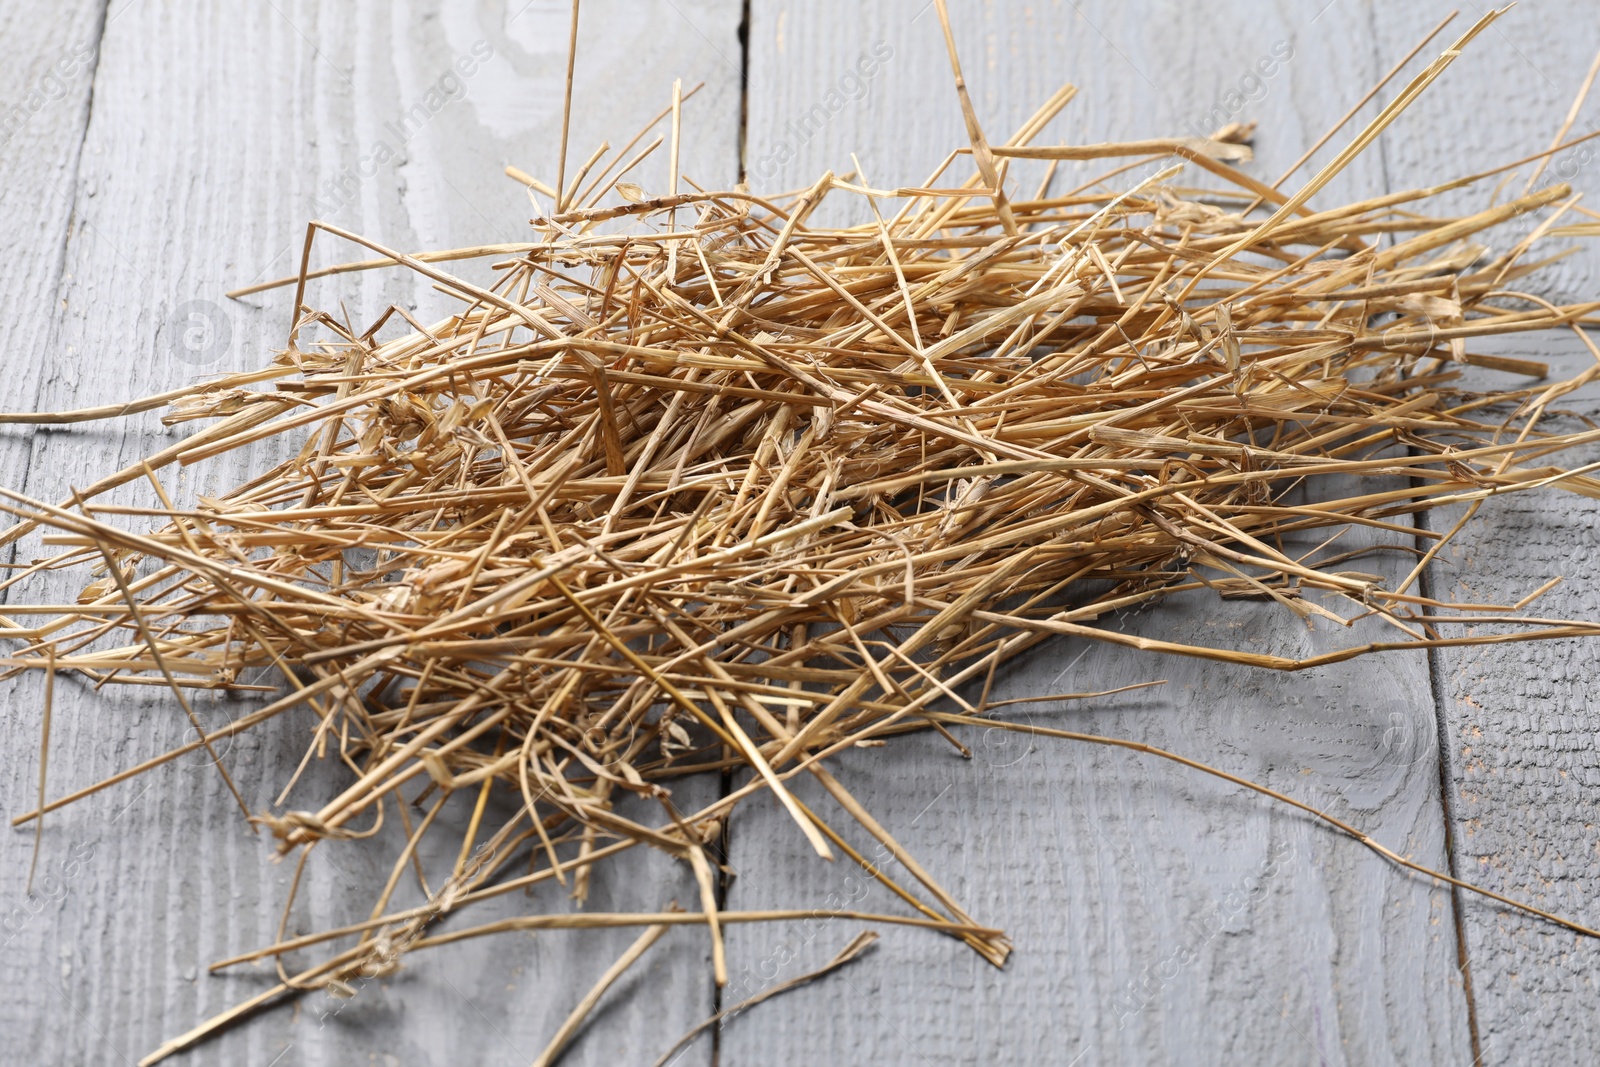 Photo of Pile of dried straw on grey wooden table